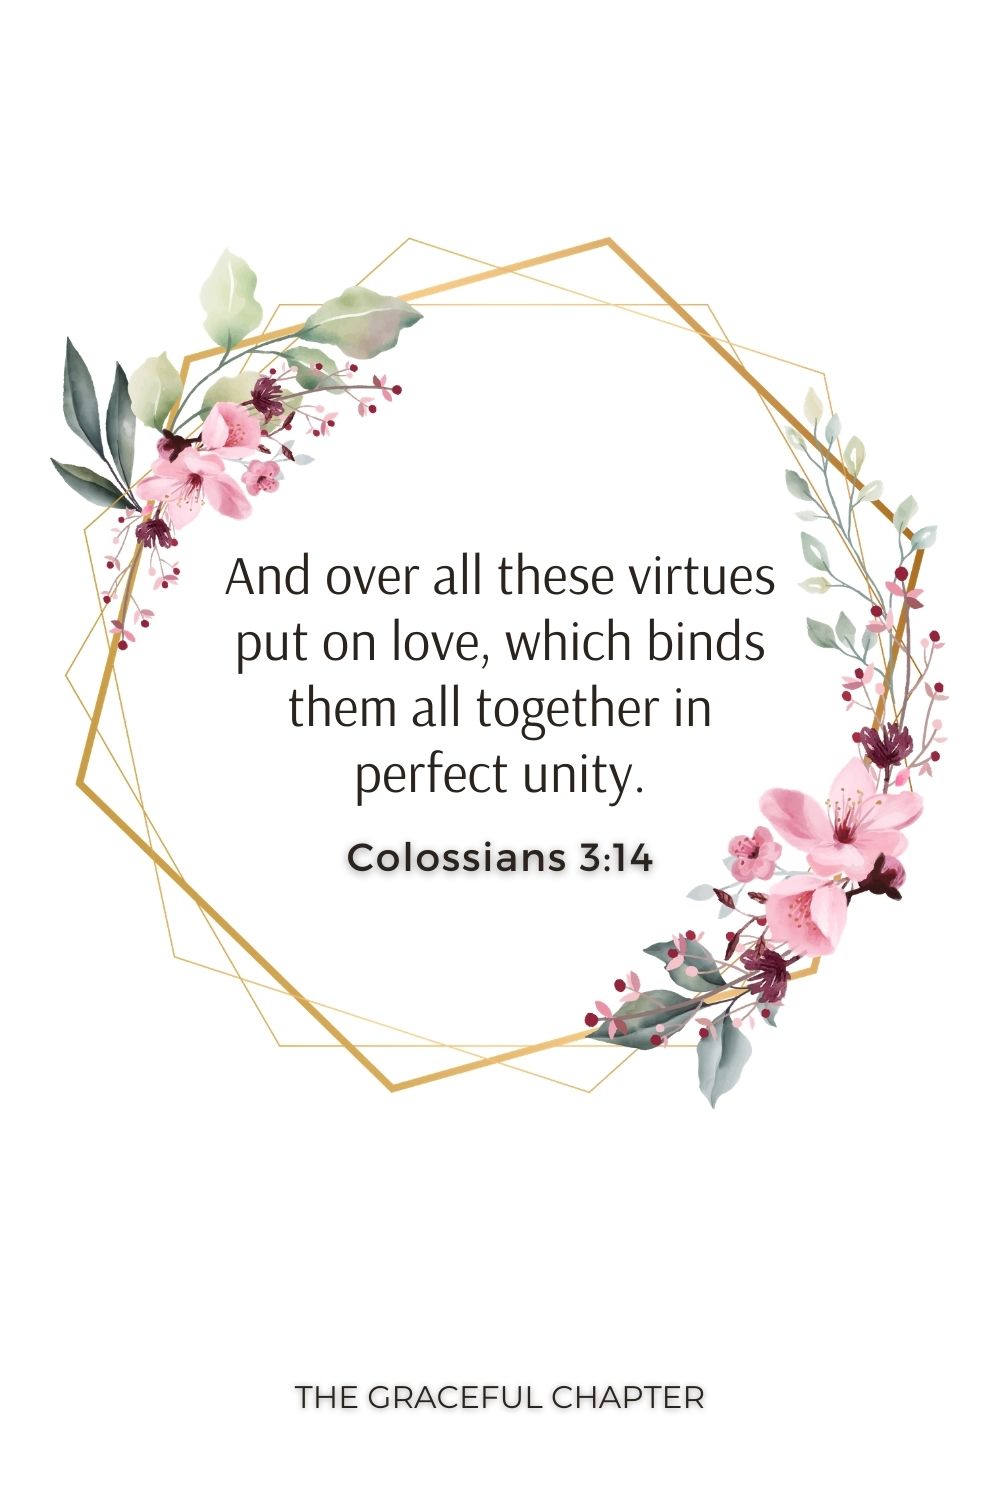 And over all these virtues put on love, which binds them all together in perfect unity. Colossians 3:14